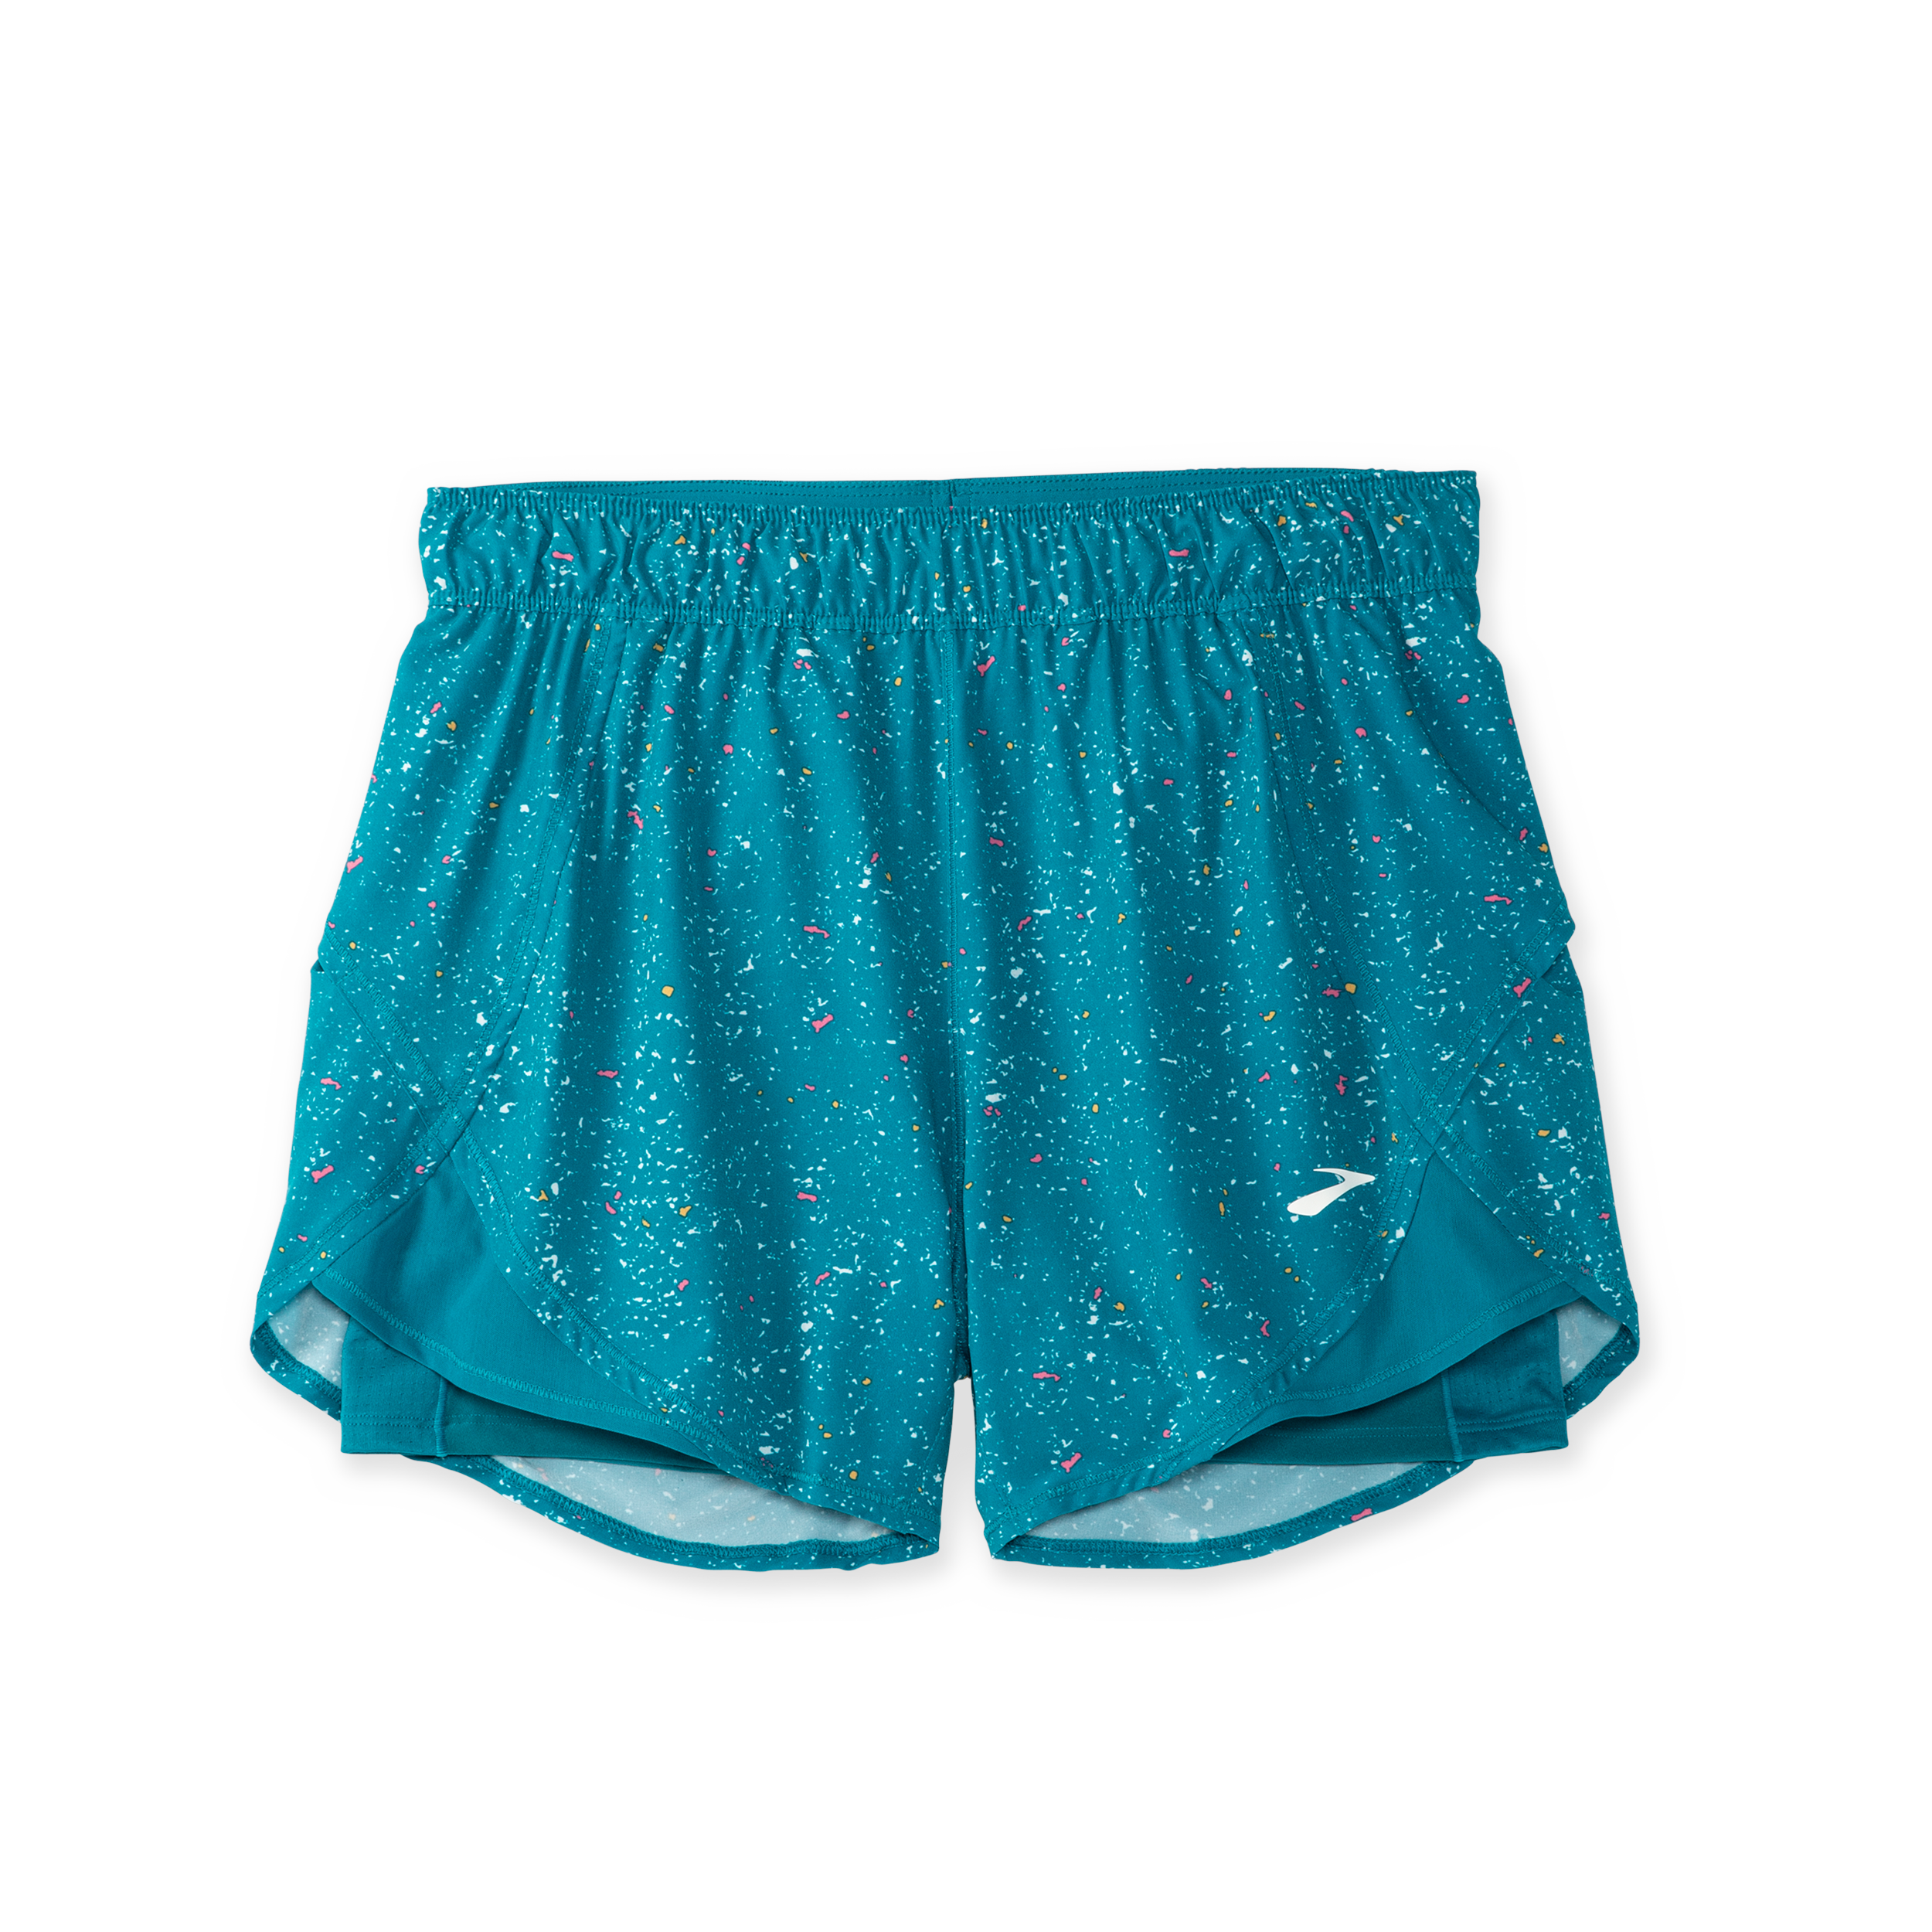 Chaser 5 2-in-1 Short, Brooks Apparel